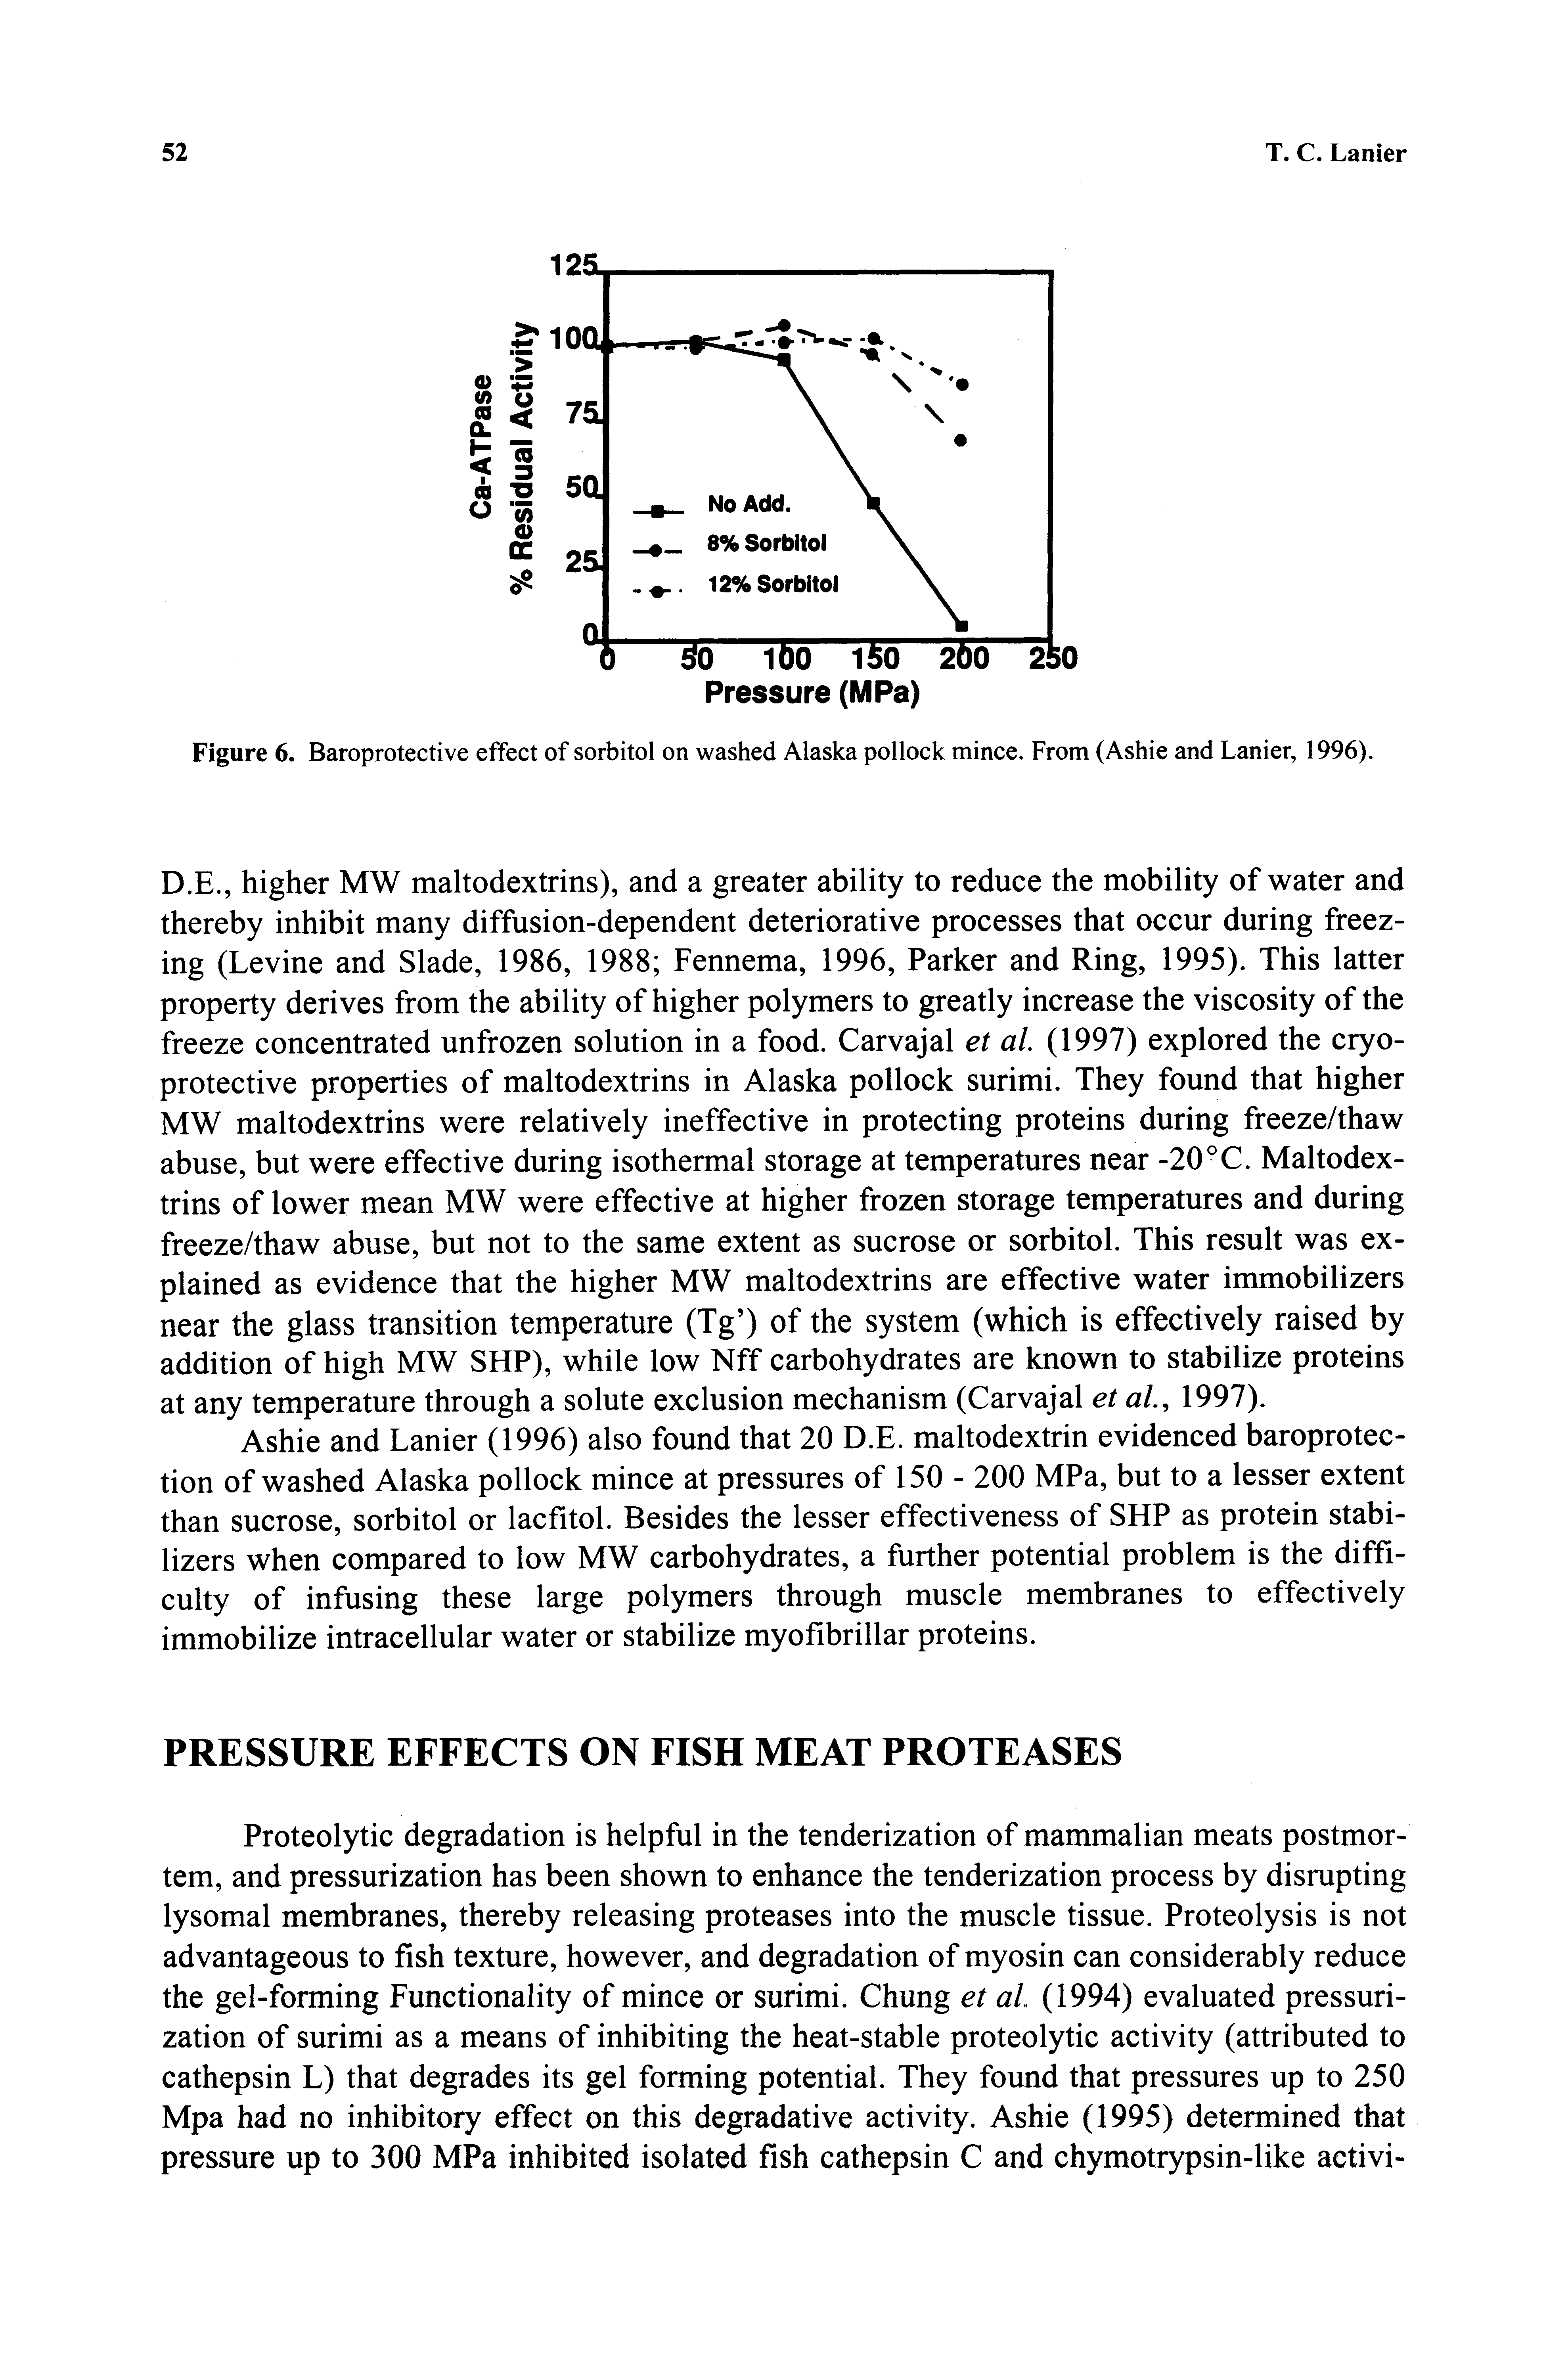 Figure 6. Baroprotective effect of sorbitol on washed Alaska pollock mince. From (Ashie and Lanier, 1996).